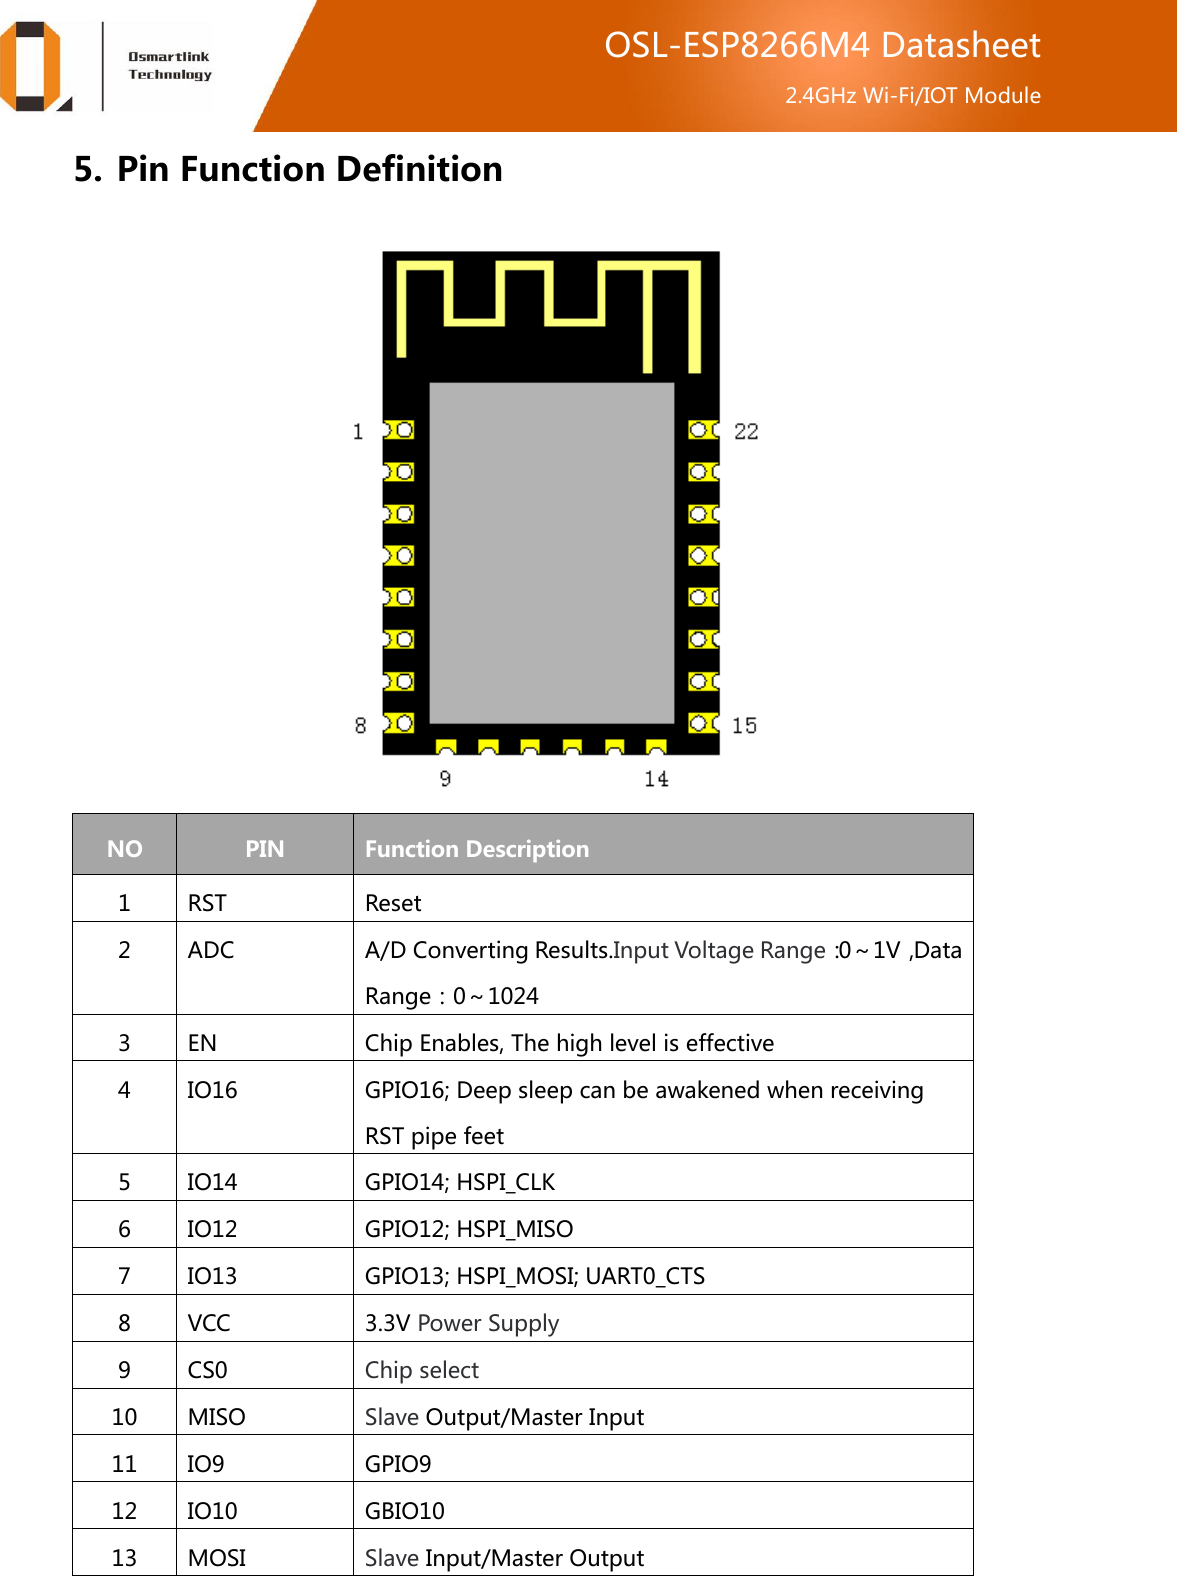  OSL-ESP8266M4 Datasheet 2.4GHz Wi-Fi/IOT Module 5. Pin Function Definition  NO PIN Function Description 1 RST Reset 2 ADC A/D Converting Results.Input Voltage Range：0～1V，Data Range：0～1024 3 EN Chip Enables, The high level is effective 4 IO16 GPIO16; Deep sleep can be awakened when receiving RST pipe feet 5 IO14 GPIO14; HSPI_CLK 6 IO12 GPIO12; HSPI_MISO 7 IO13 GPIO13; HSPI_MOSI; UART0_CTS 8 VCC 3.3V Power Supply 9 CS0 • Chip select 10 MISO Slave Output/Master Input 11 IO9 GPIO9 12 IO10 GBIO10 13 MOSI Slave Input/Master Output 